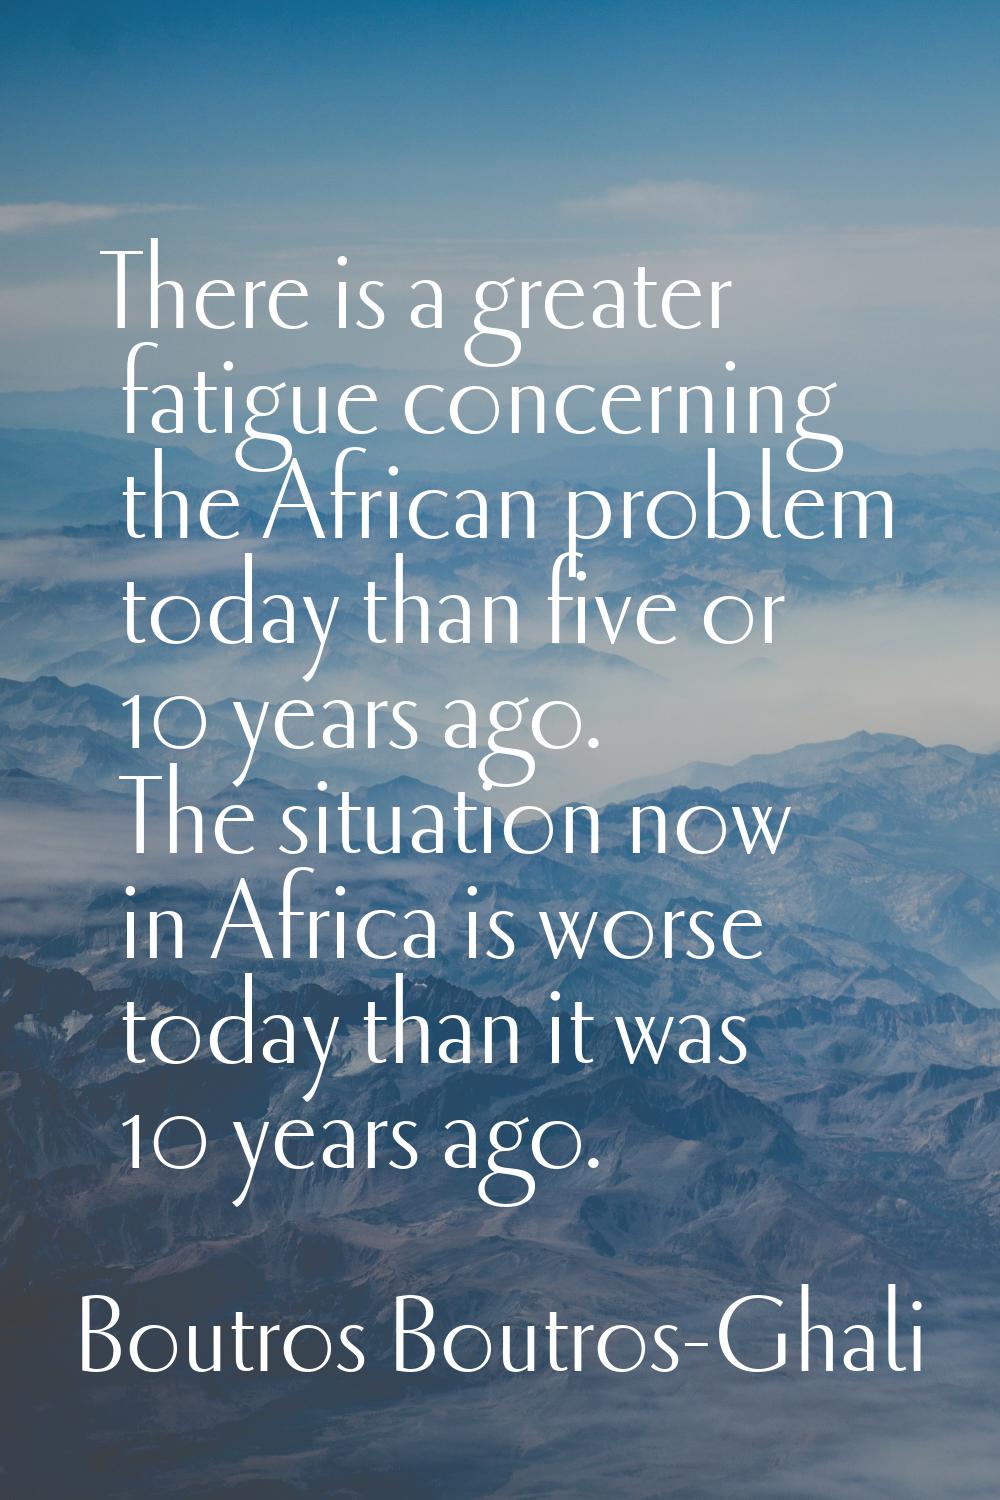 There is a greater fatigue concerning the African problem today than five or 10 years ago. The situ